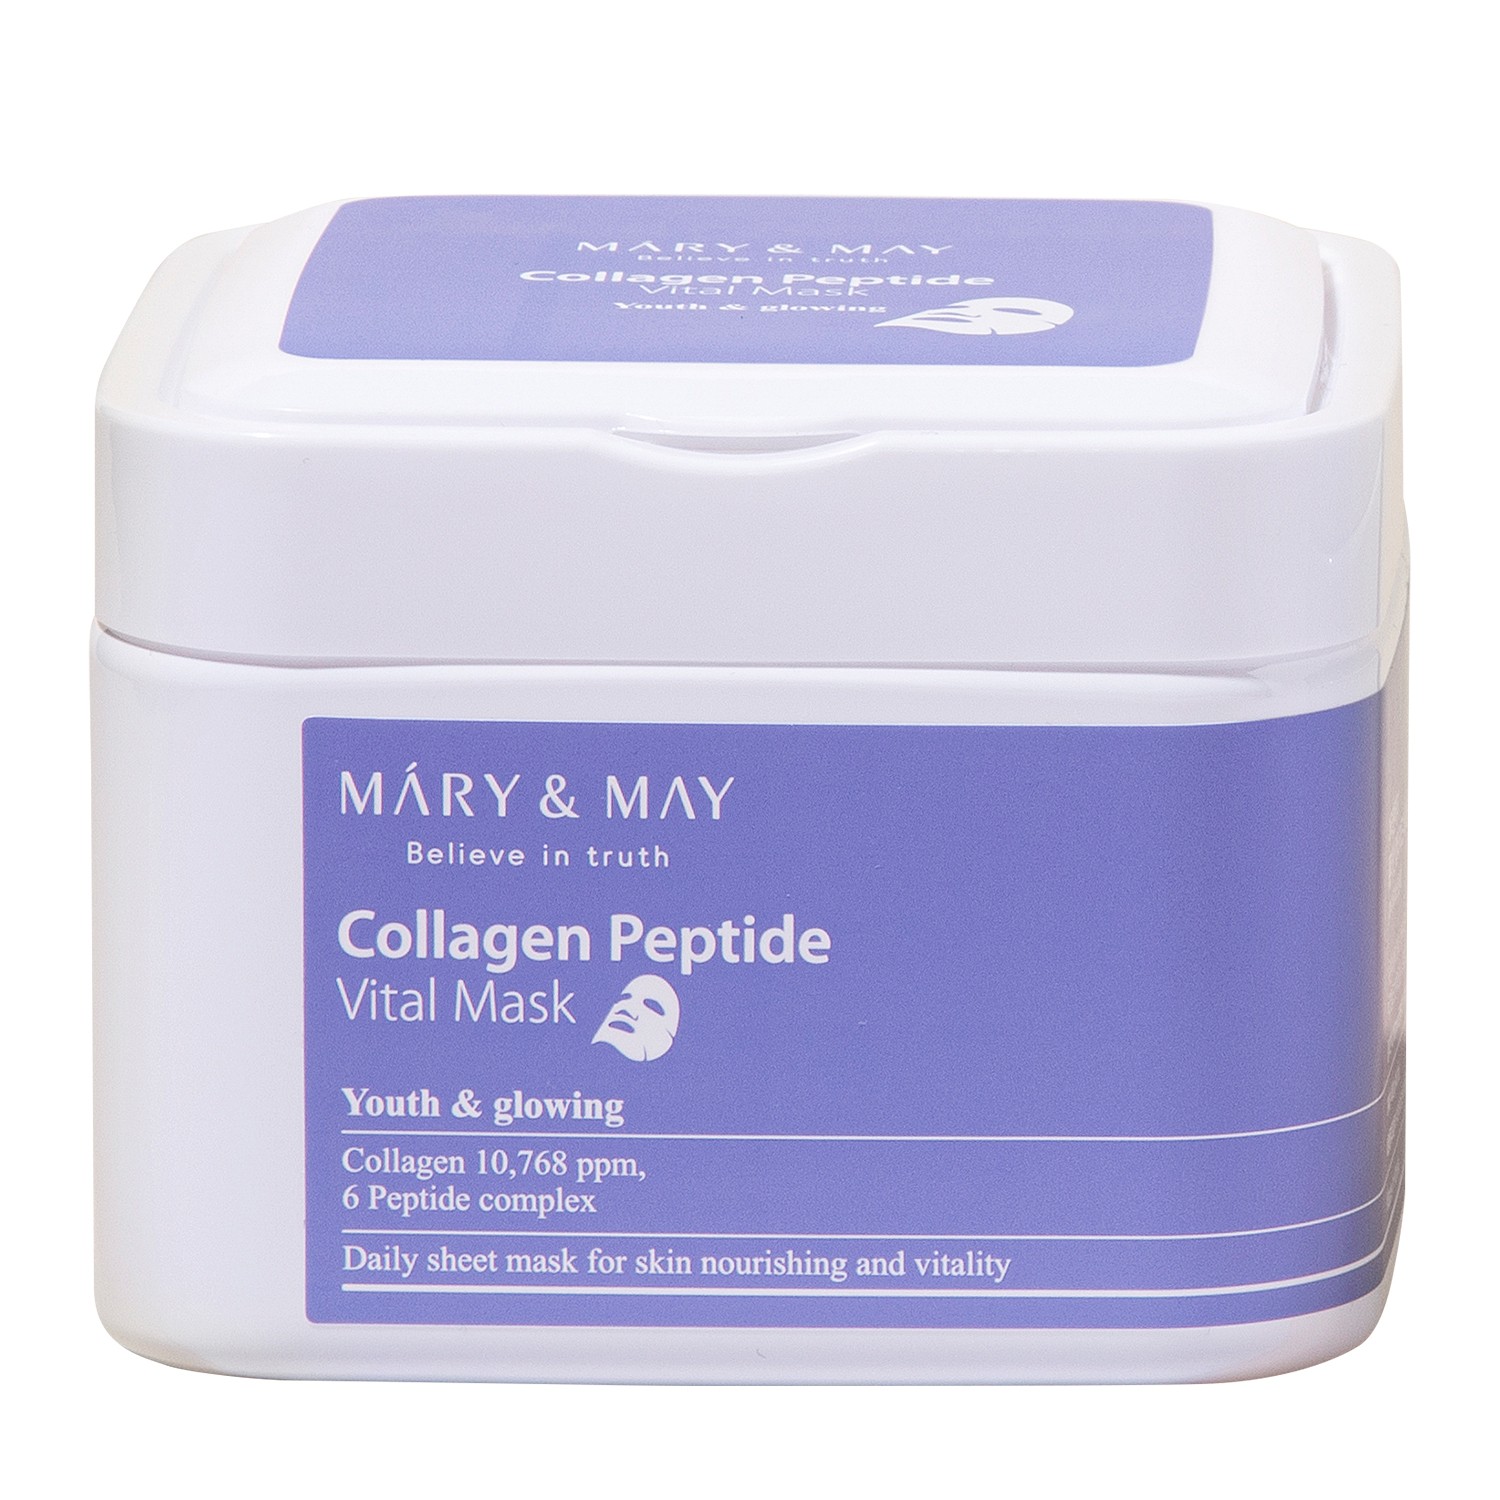 skincare-kbeauty-glowtime-mary & mary collagen peptide vital mask